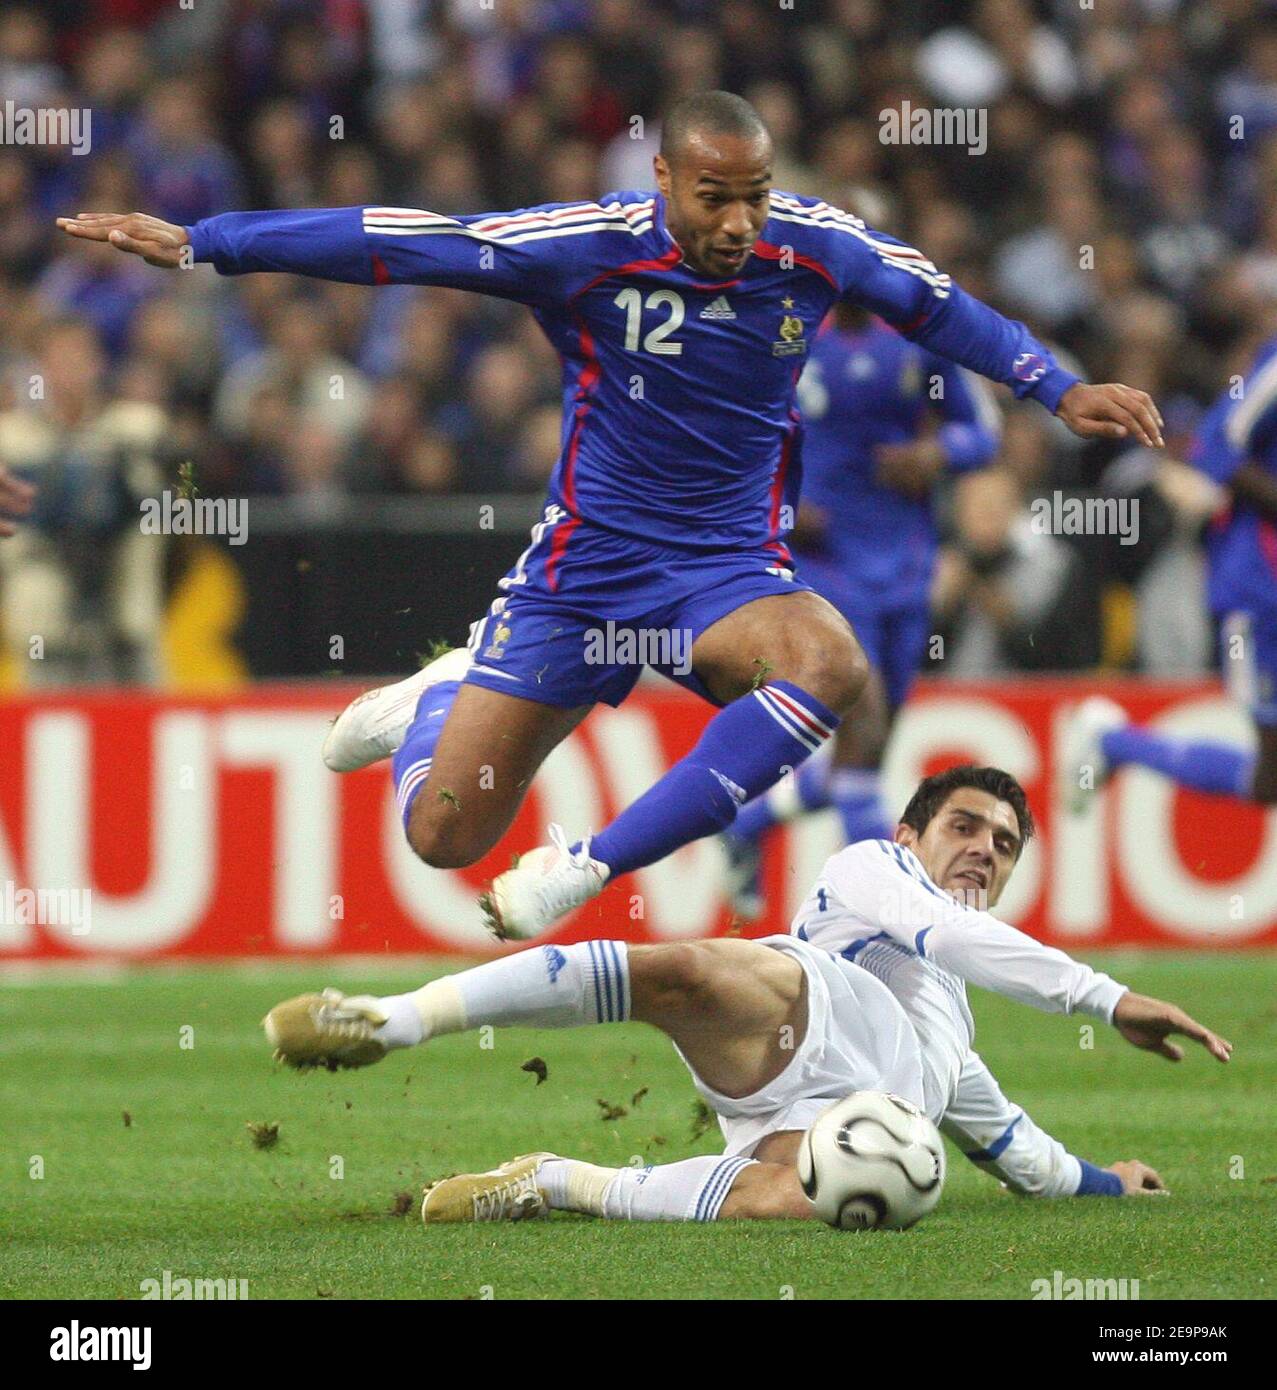 Greece' Konstantinos Katsouranis tackles France's Thierry Henry during International Friendly match, France vs Greece at the Stade de France, in Paris, France on November 15, 2006. France won 1-0. Photo by Gouhier-Taamallah/Cameleon/ABACAPRESS.COM Stock Photo